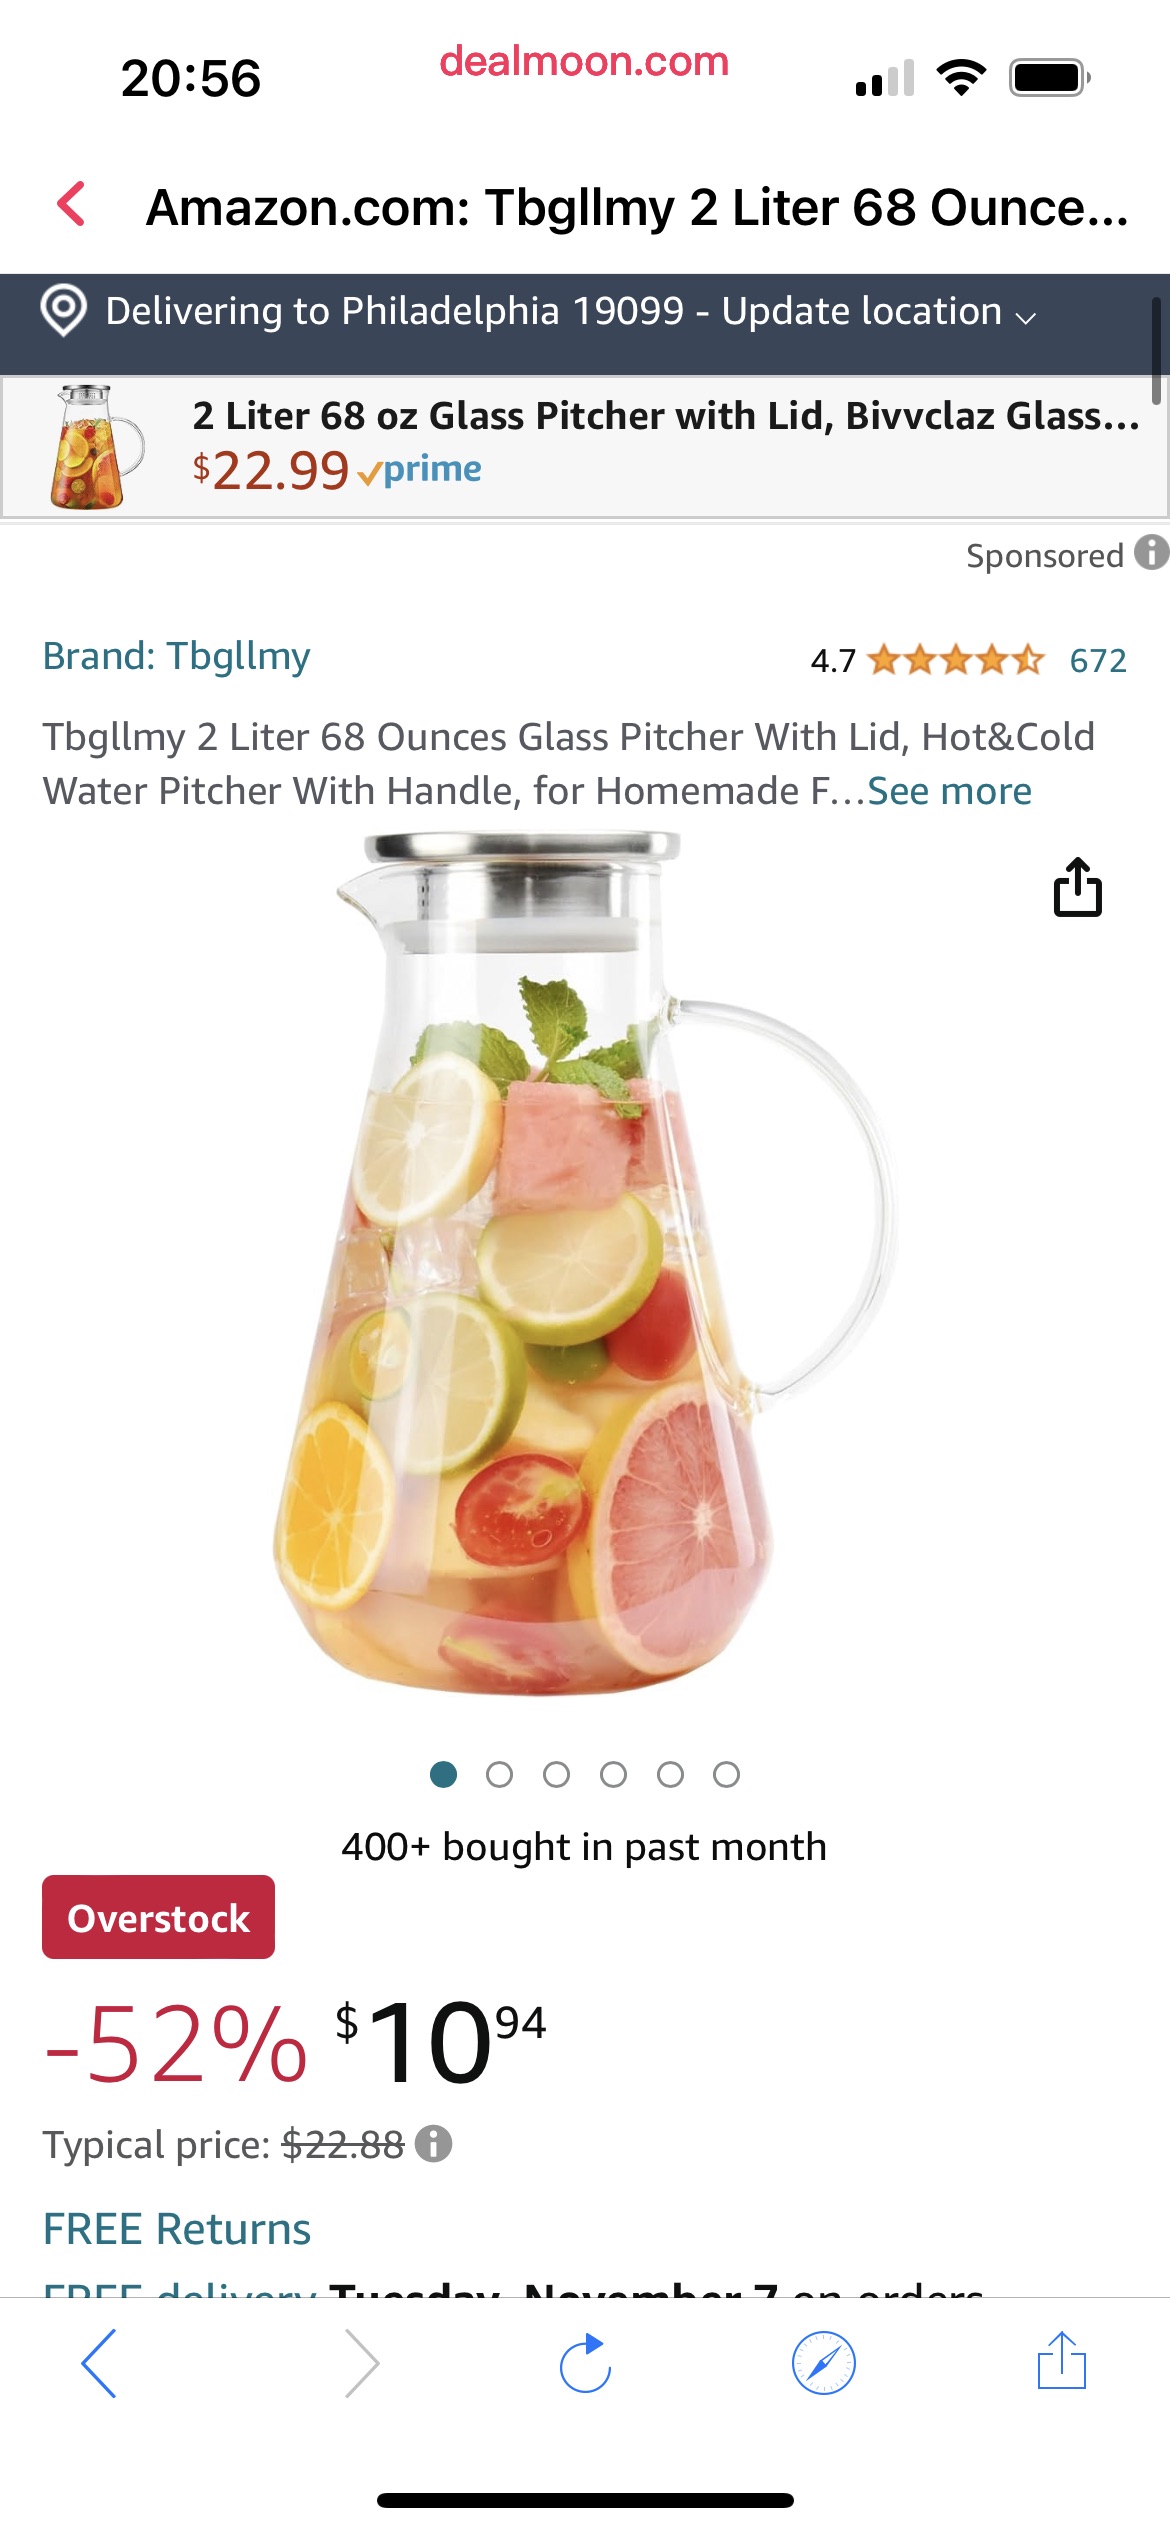 Amazon.com: Tbgllmy 2 Liter 68 Ounces Glass Pitcher With Lid, Hot&Cold Water Pitcher With Handle, for Homemade Fruit Beverage, Juice, Iced Tea and Milk Clear : Home & Kitchen